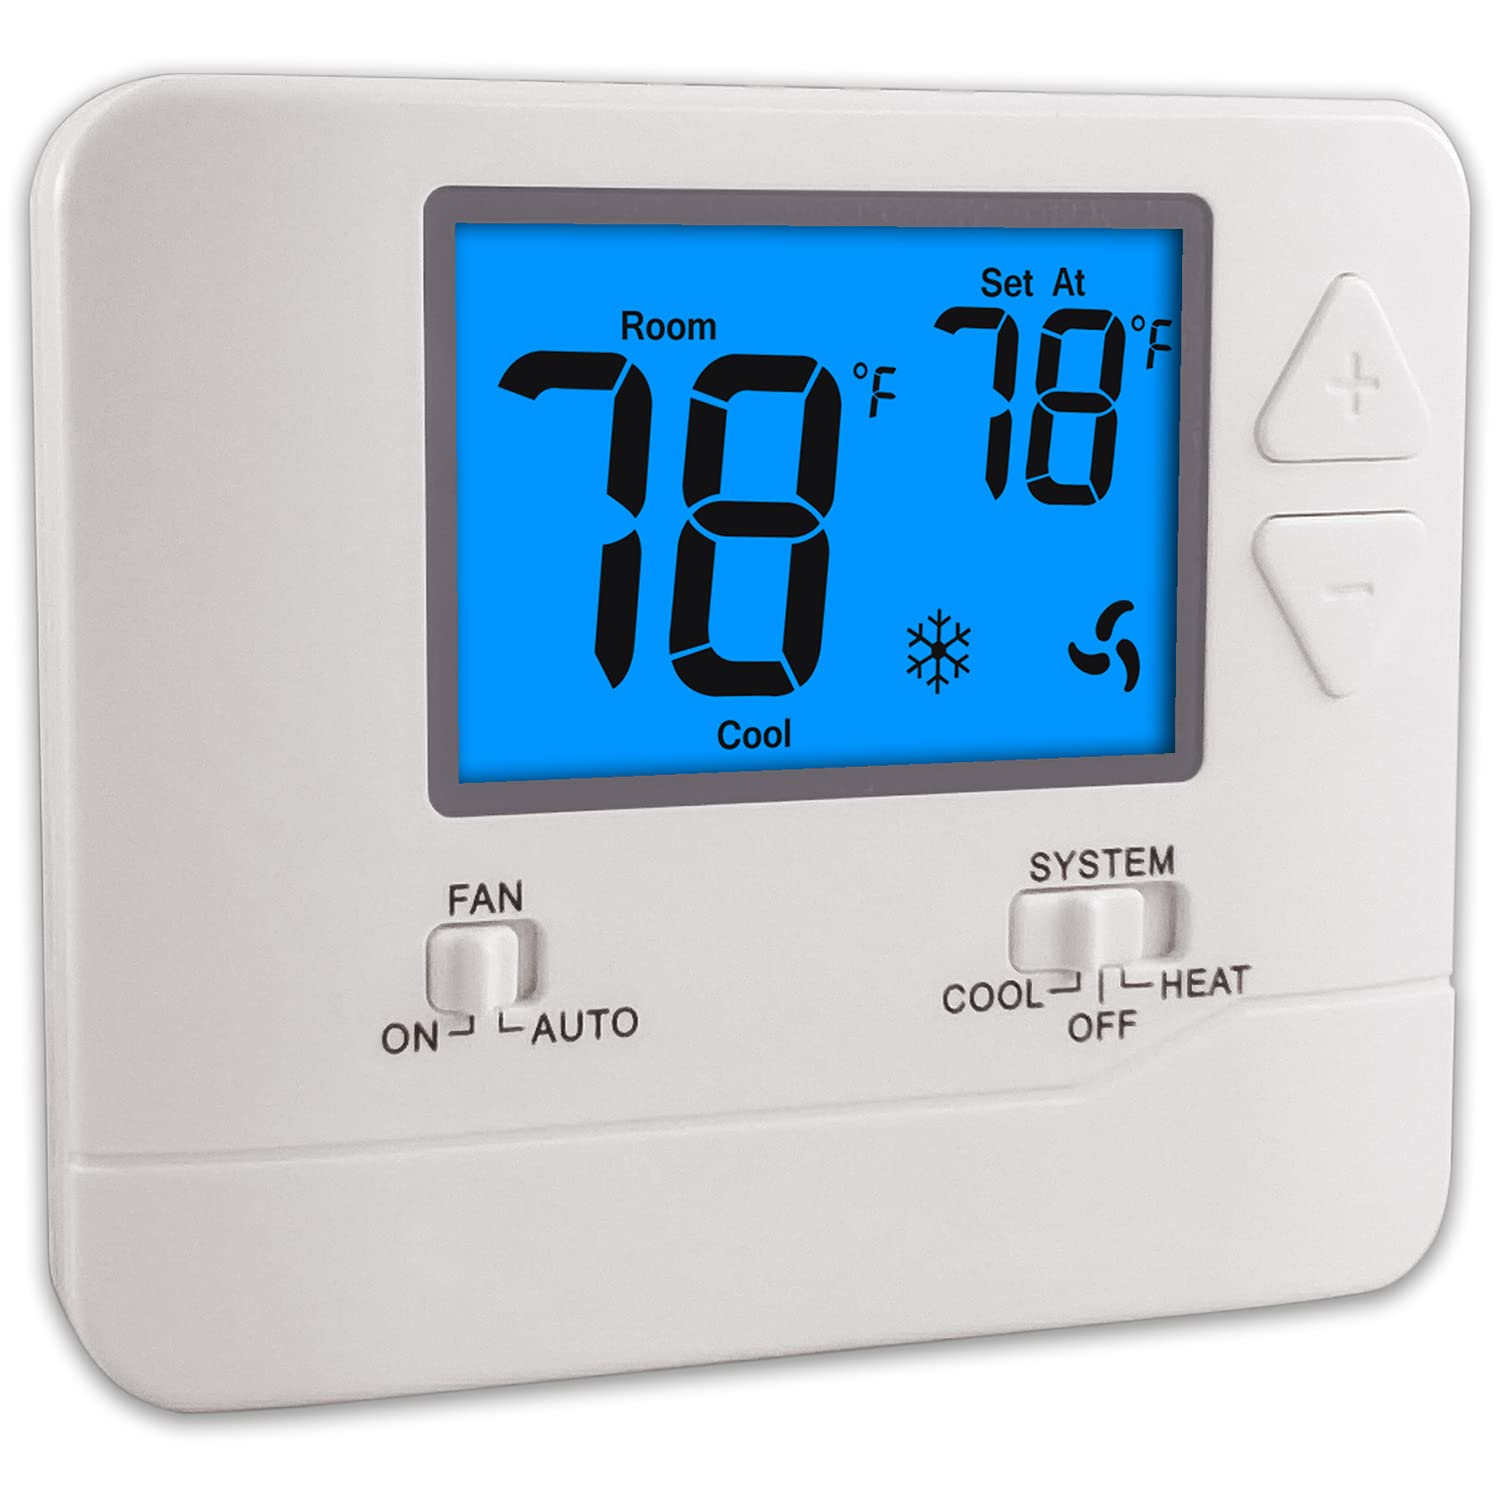 Electrical and analog electronic thermostats